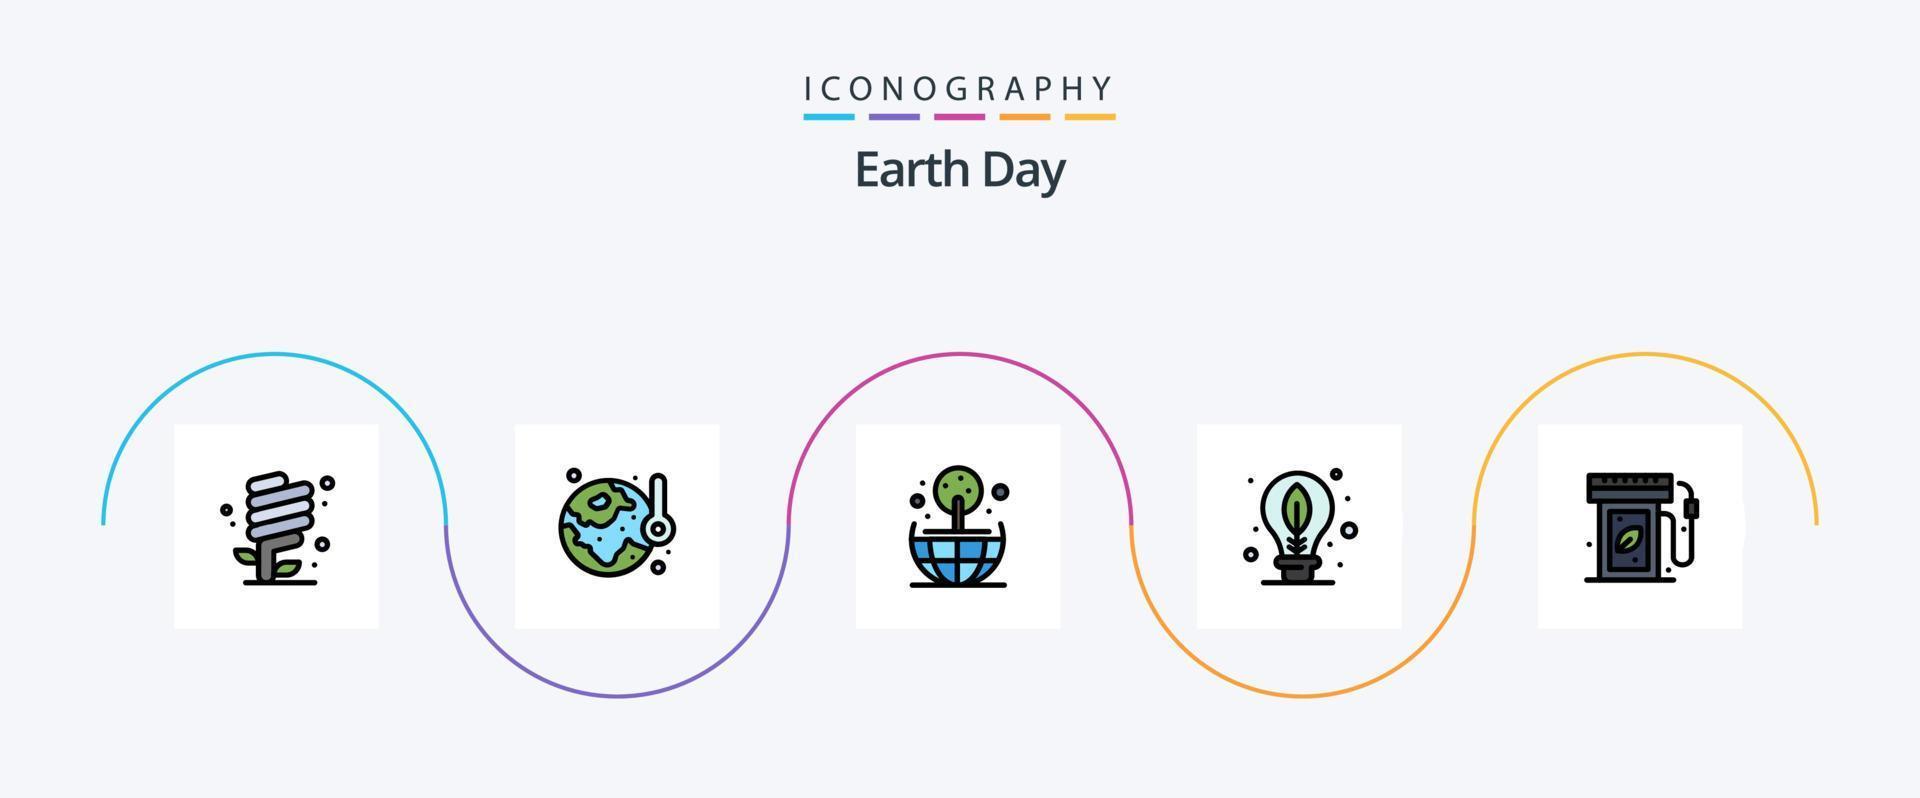 Earth Day Line gefüllt Flat 5 Icon Pack inklusive Earth Day. Birne. Temperatur. Tag. Welt vektor